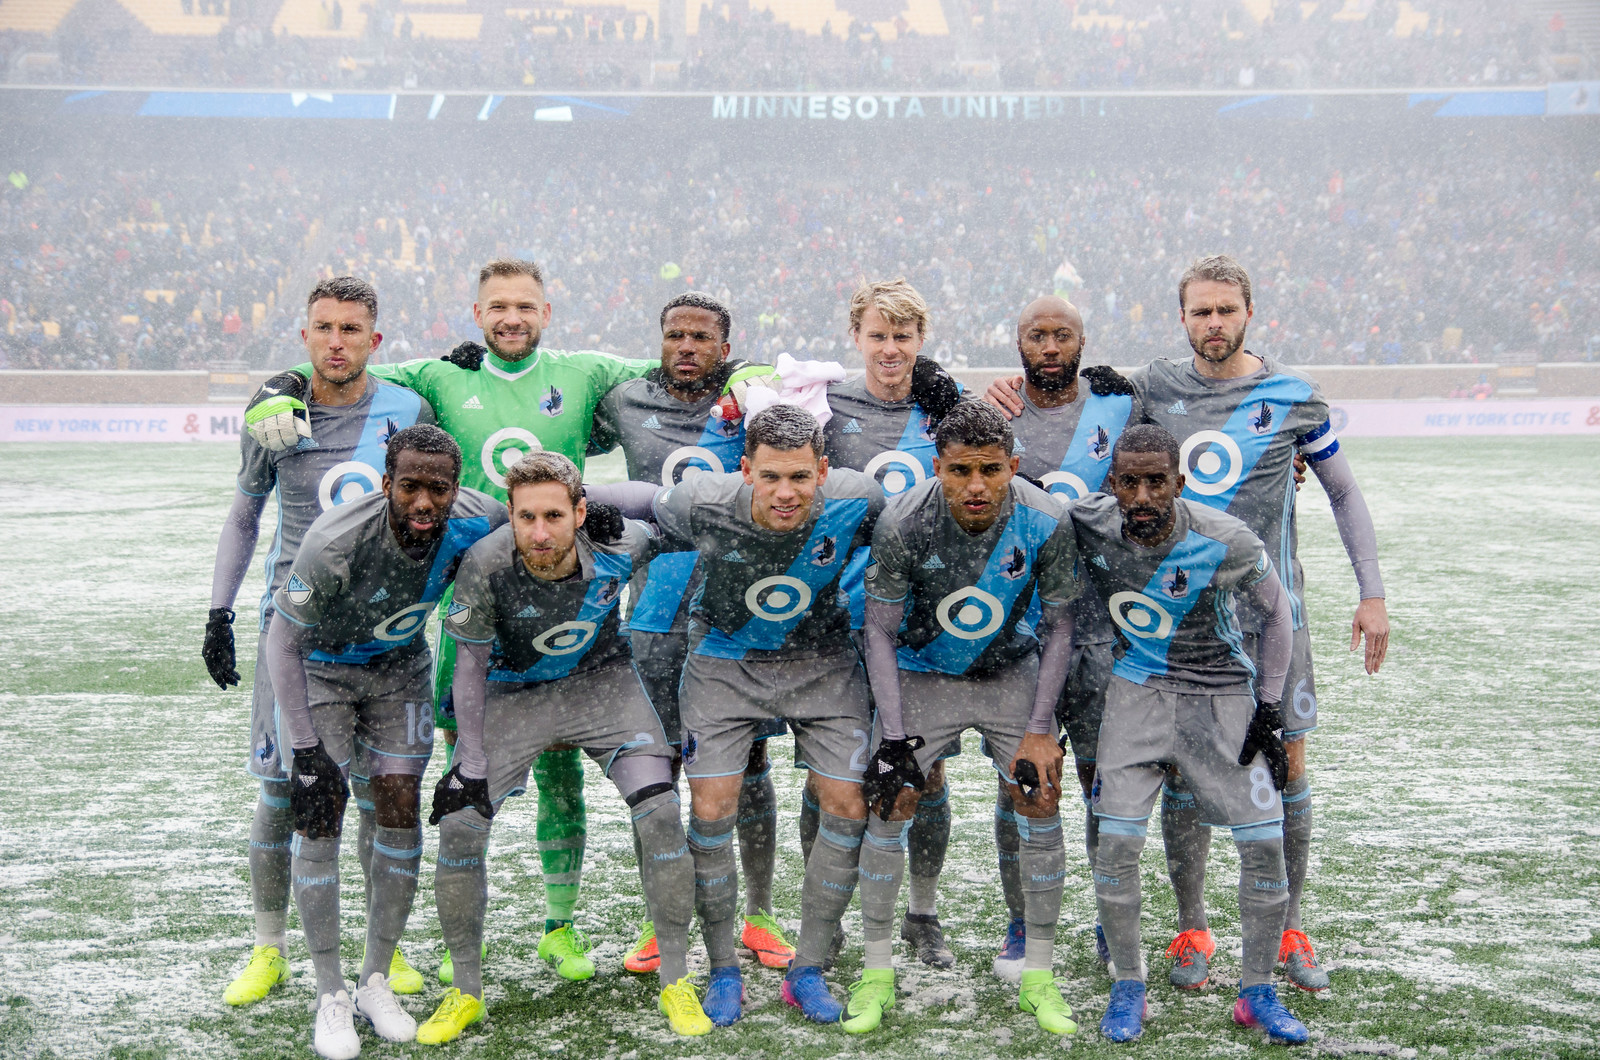 “The Fans Didn’t Deserve That” Minnesota United Loses Inauspicious Home Opener 6-1